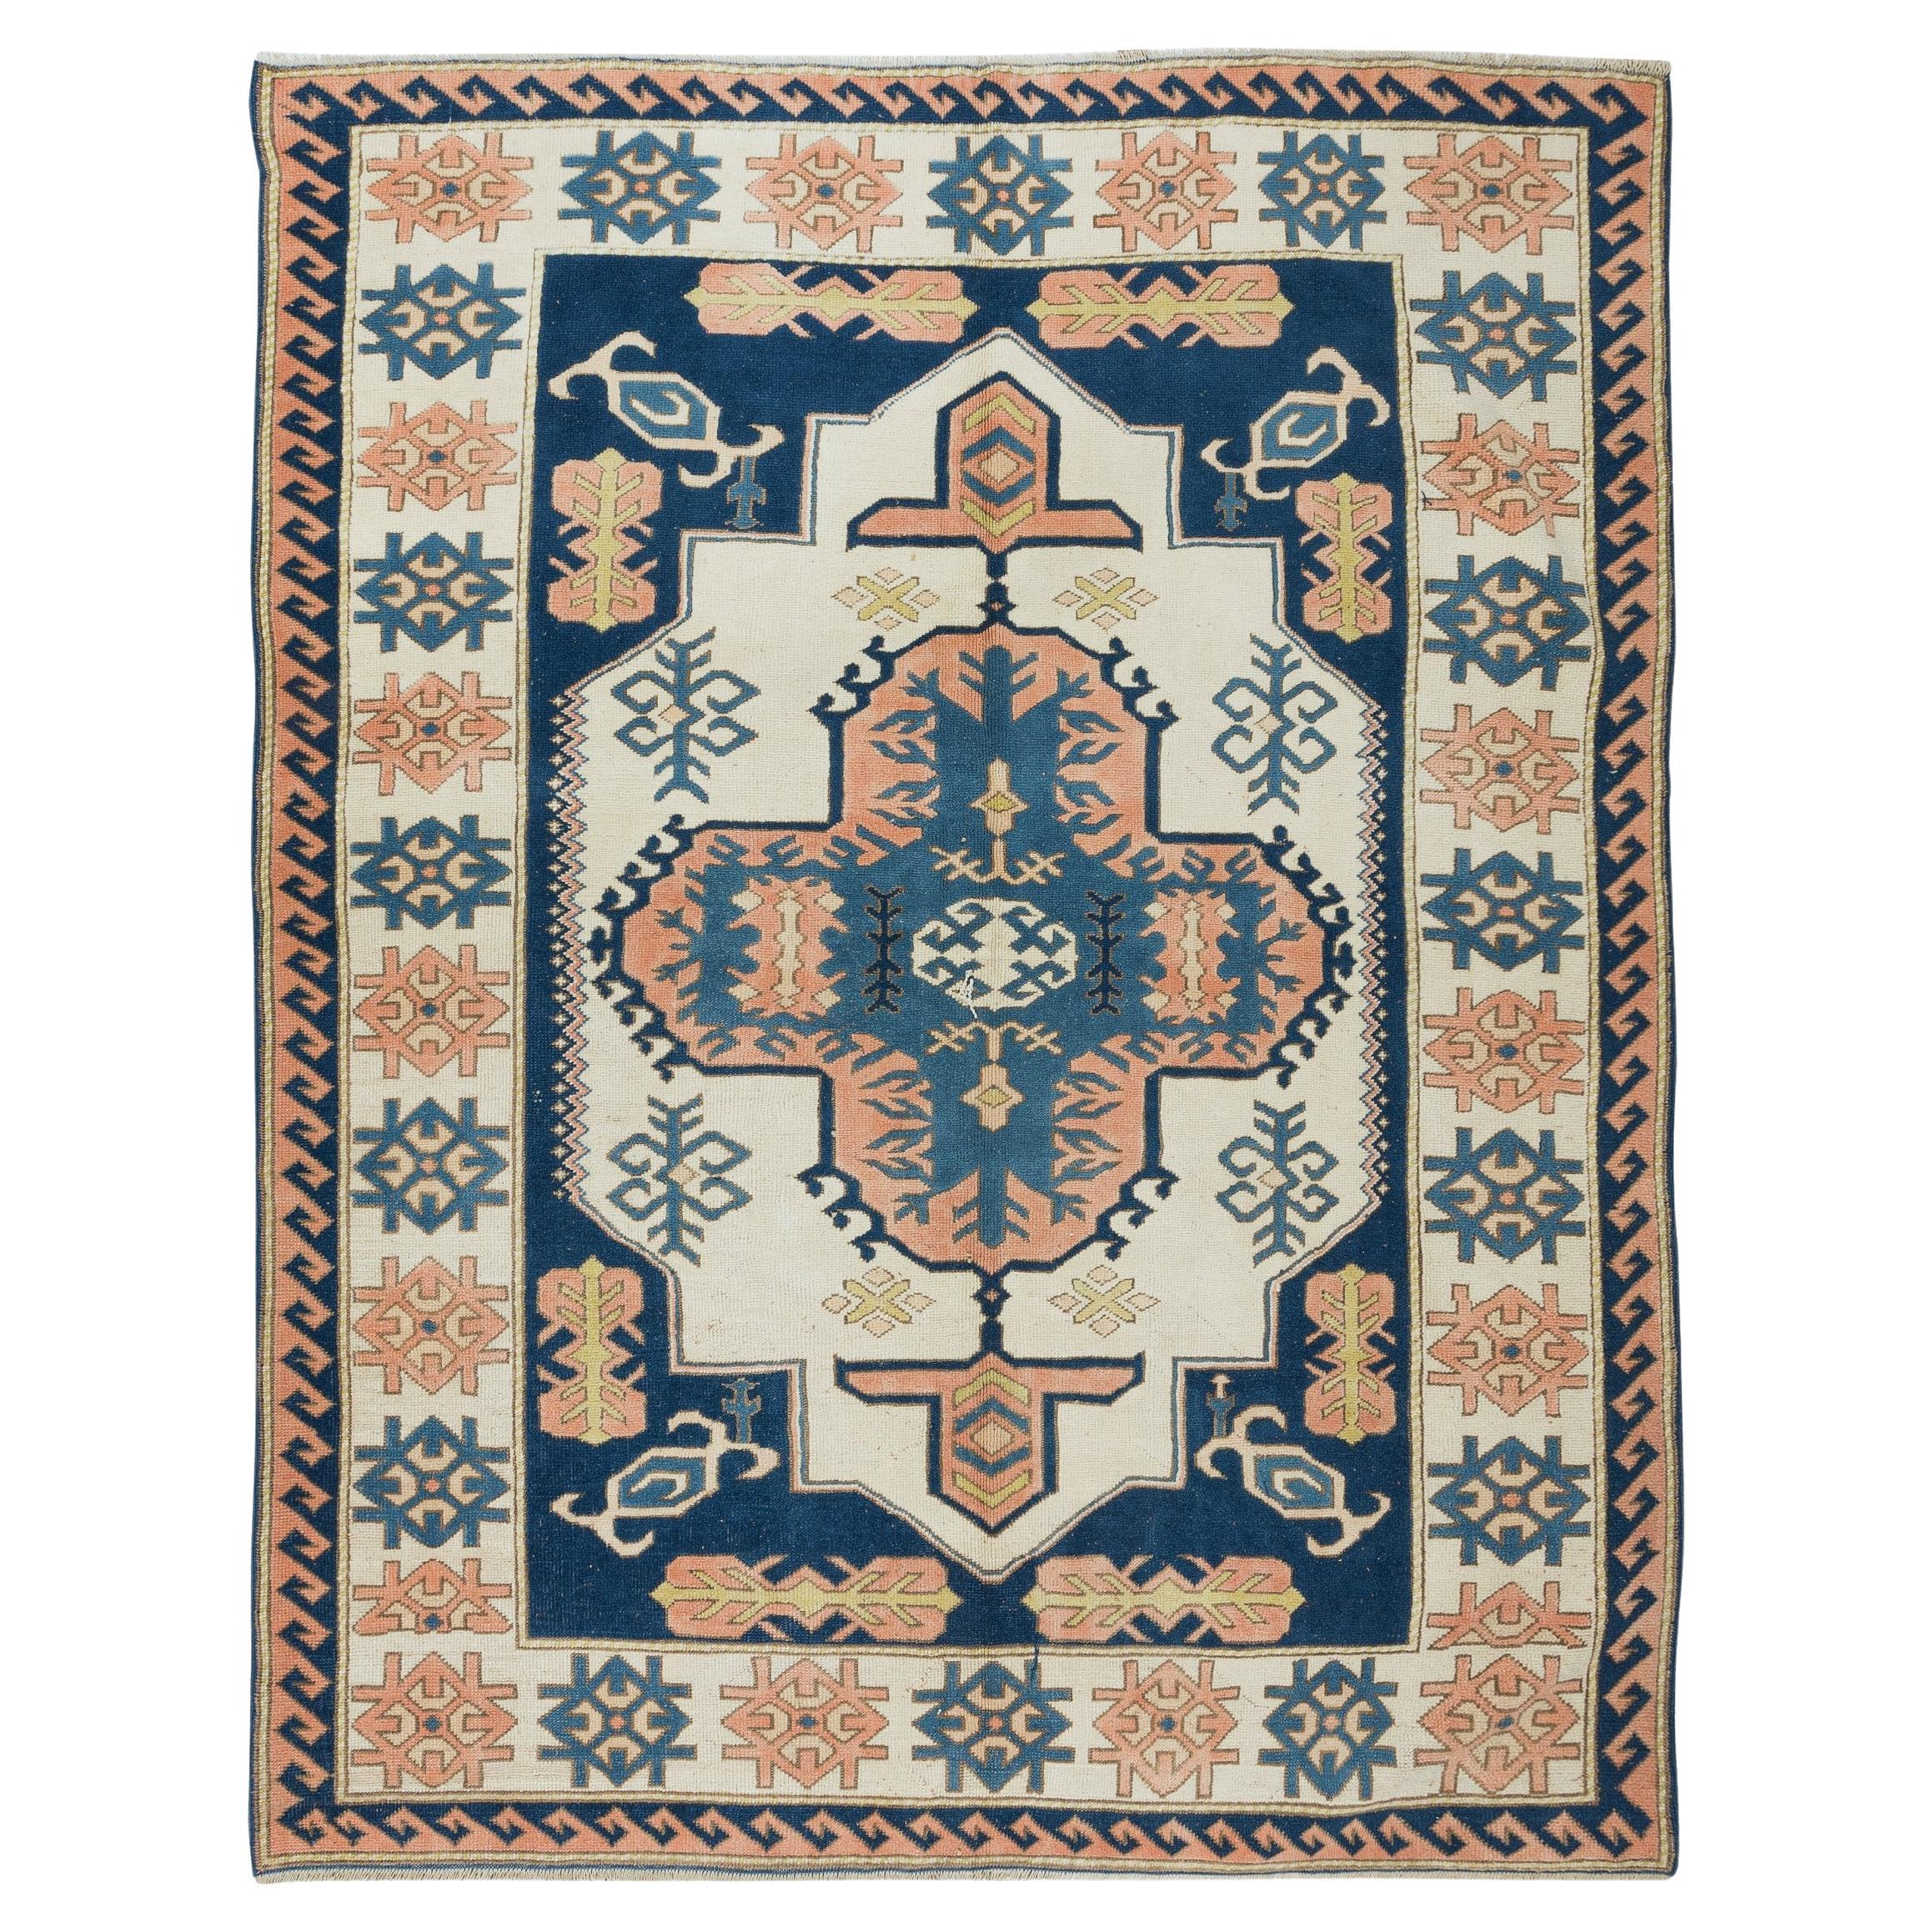 7.3x9.2 Ft Central Anatolian Handmade Traditional Rug, Vintage Geometric Carpet For Sale